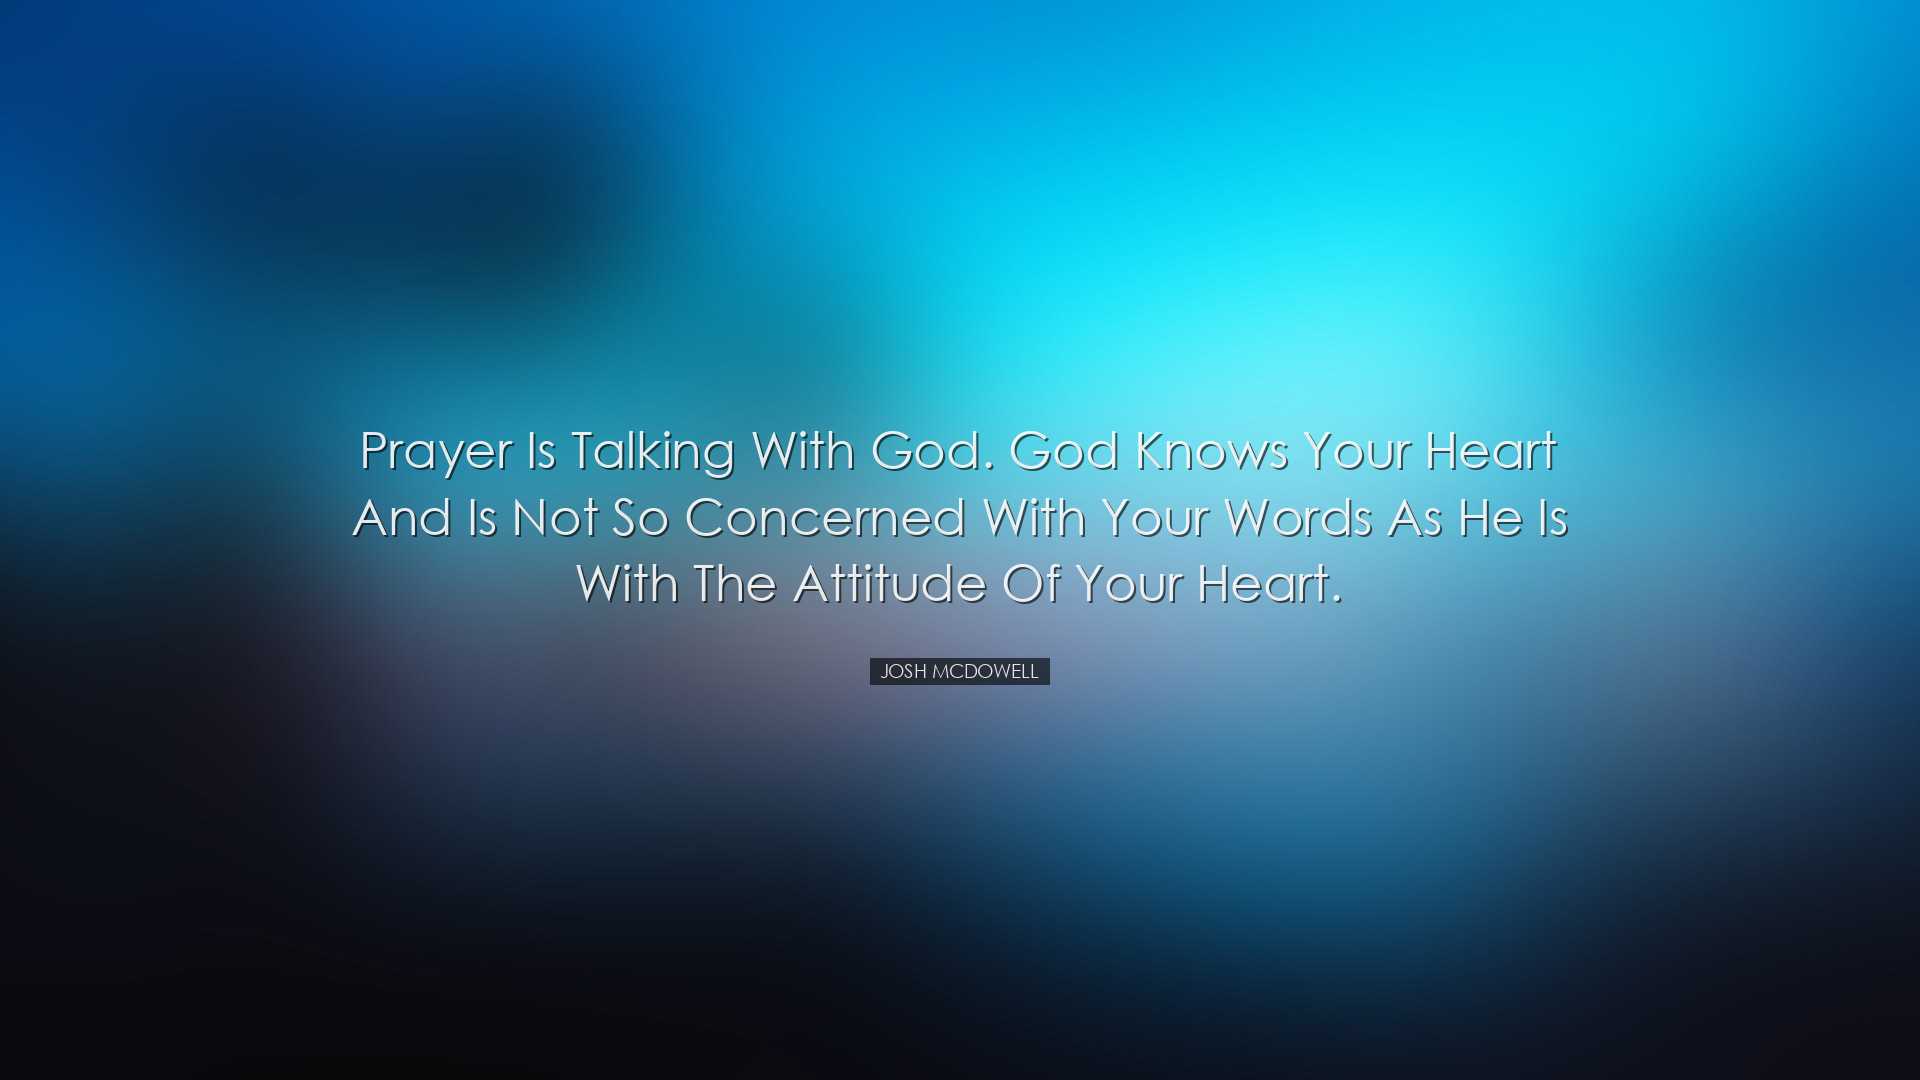 Prayer is talking with God. God knows your heart and is not so con